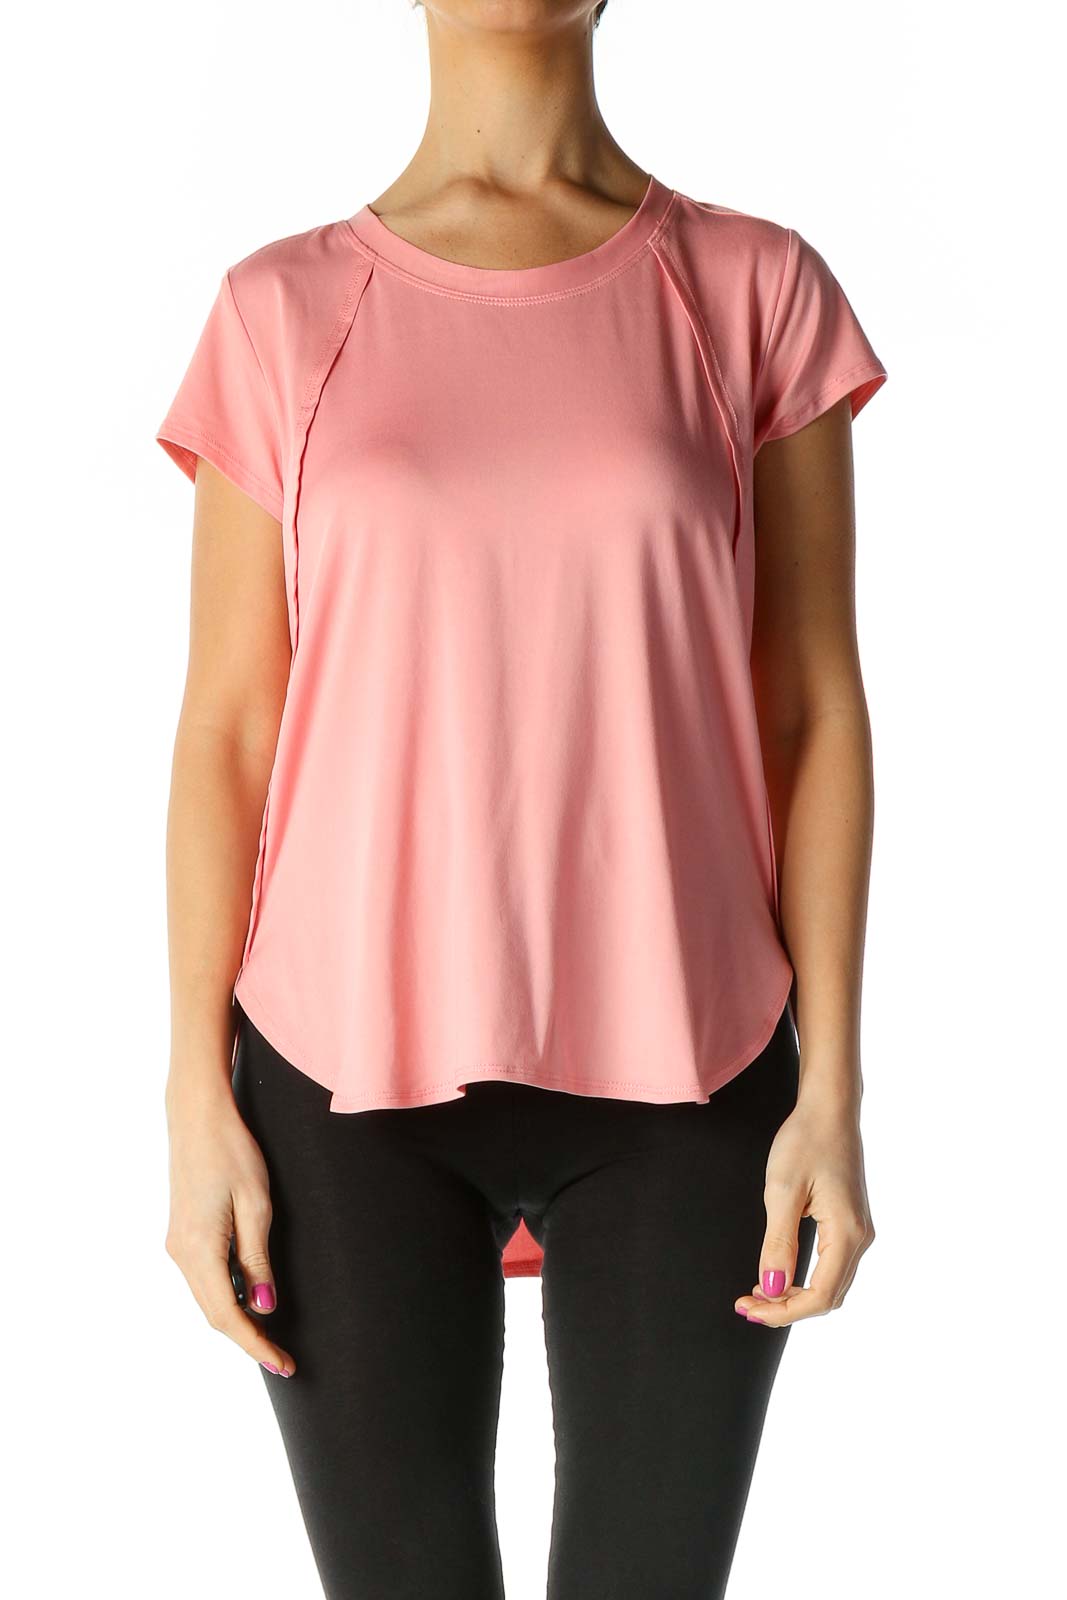 Pink Solid Activewear Top Front